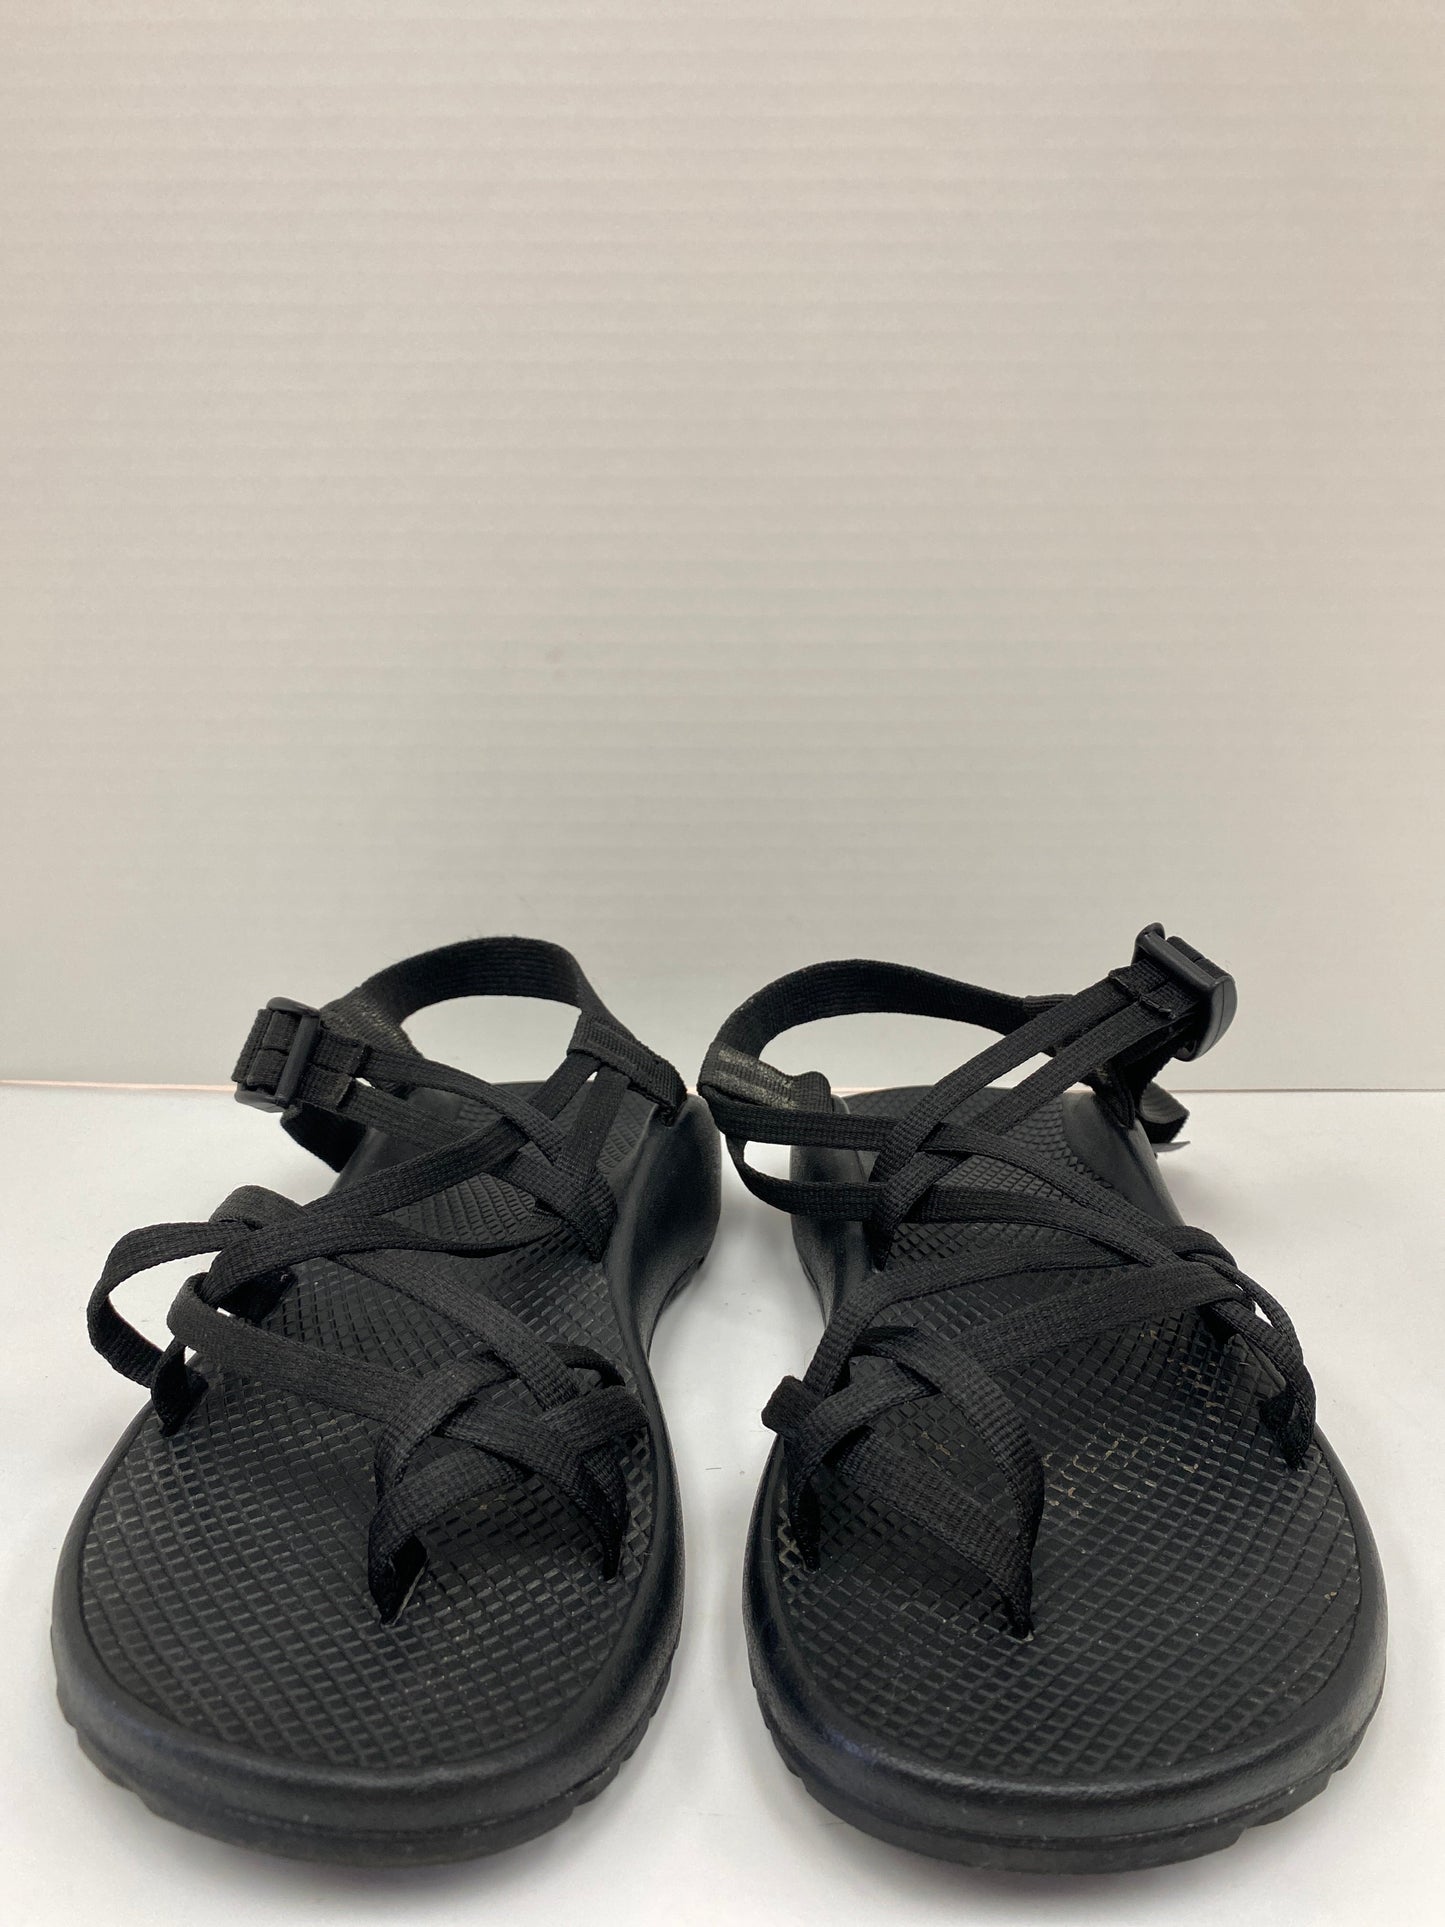 Sandals Flats By Chacos  Size: 9